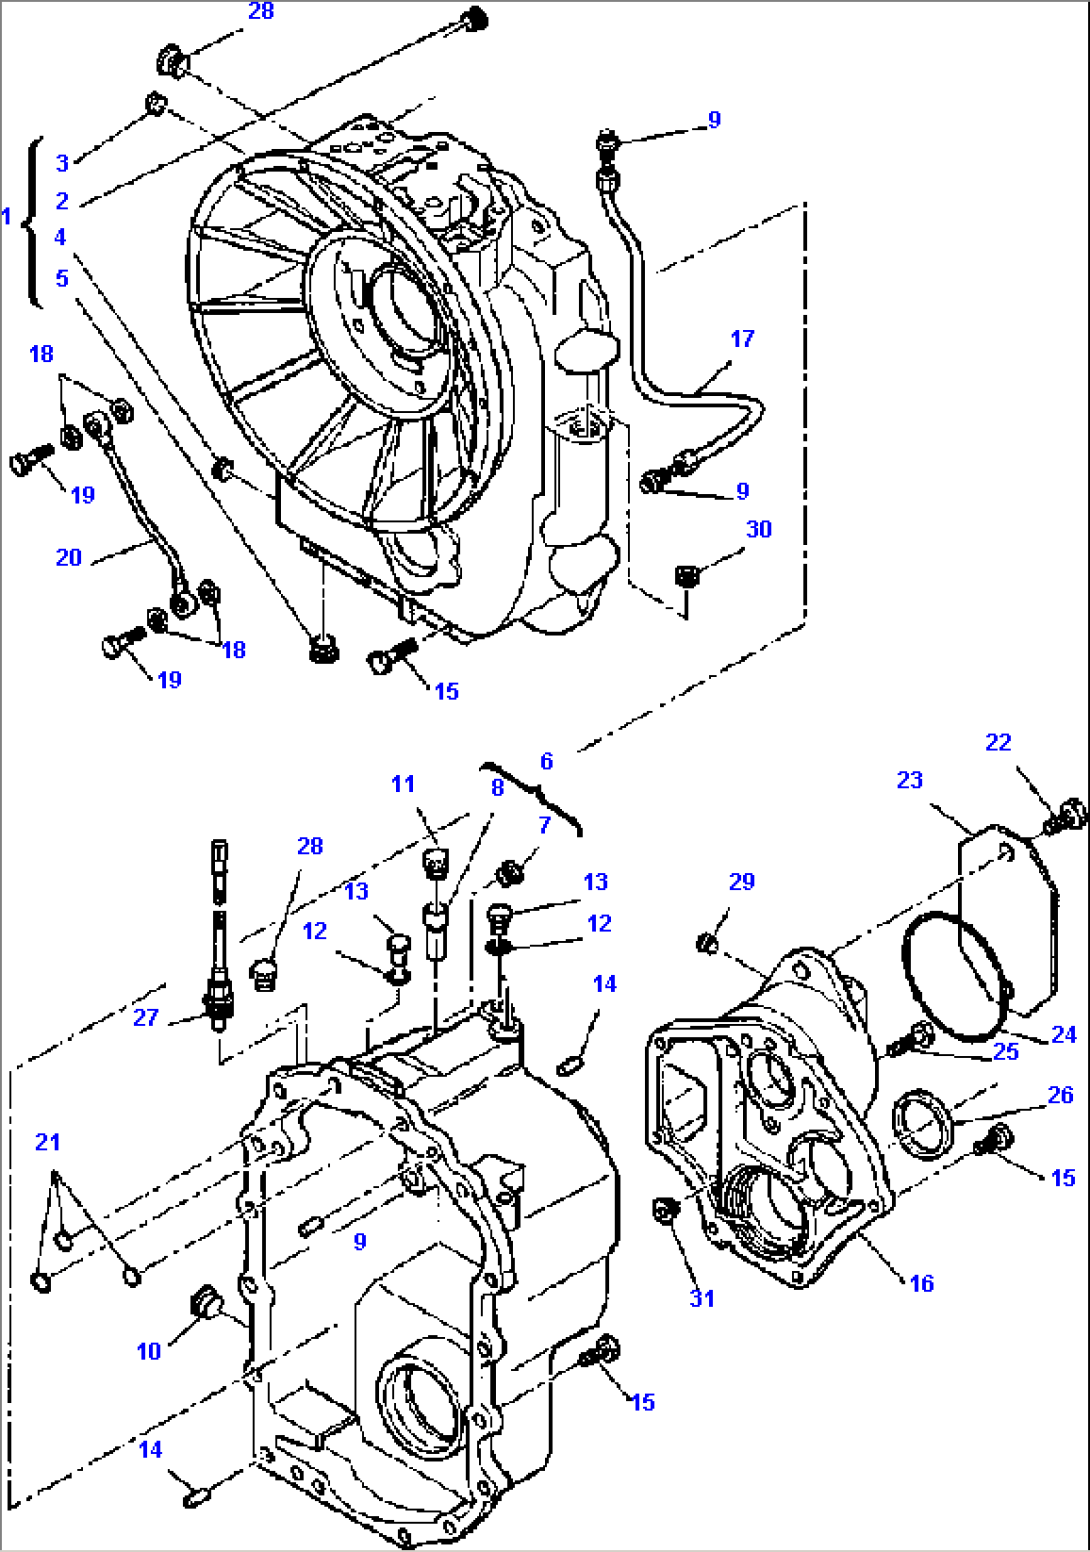 FIG. F3230-01A0 TRANSMISSION (4WD) - FRONT AND REAR HOUSING